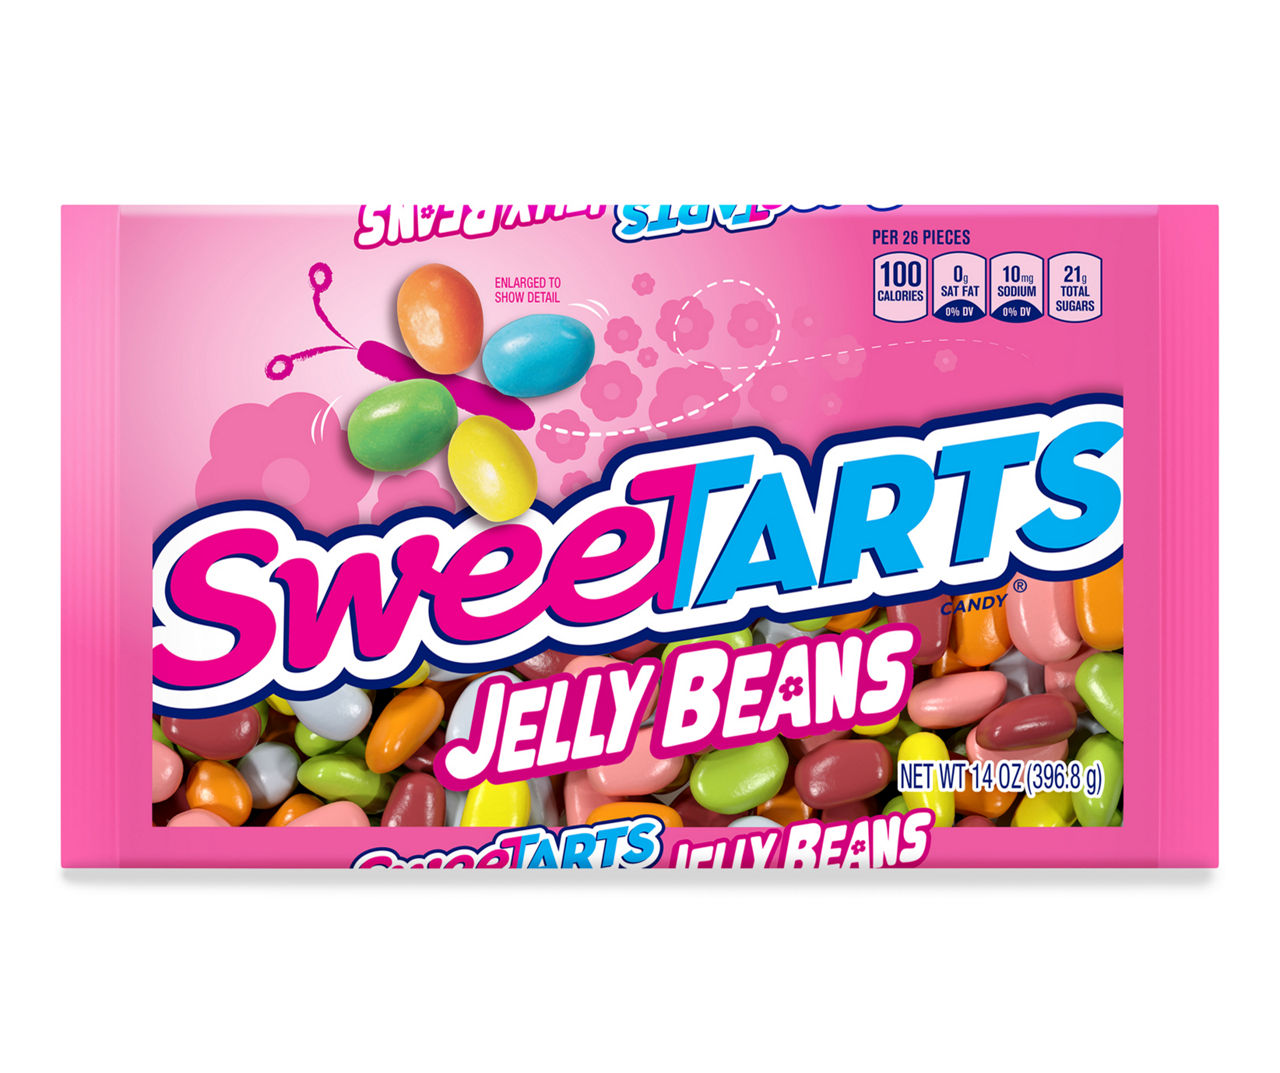 SweetTARTS SWEETARTS Jelly Beans Easter Candy 14 oz. Bag